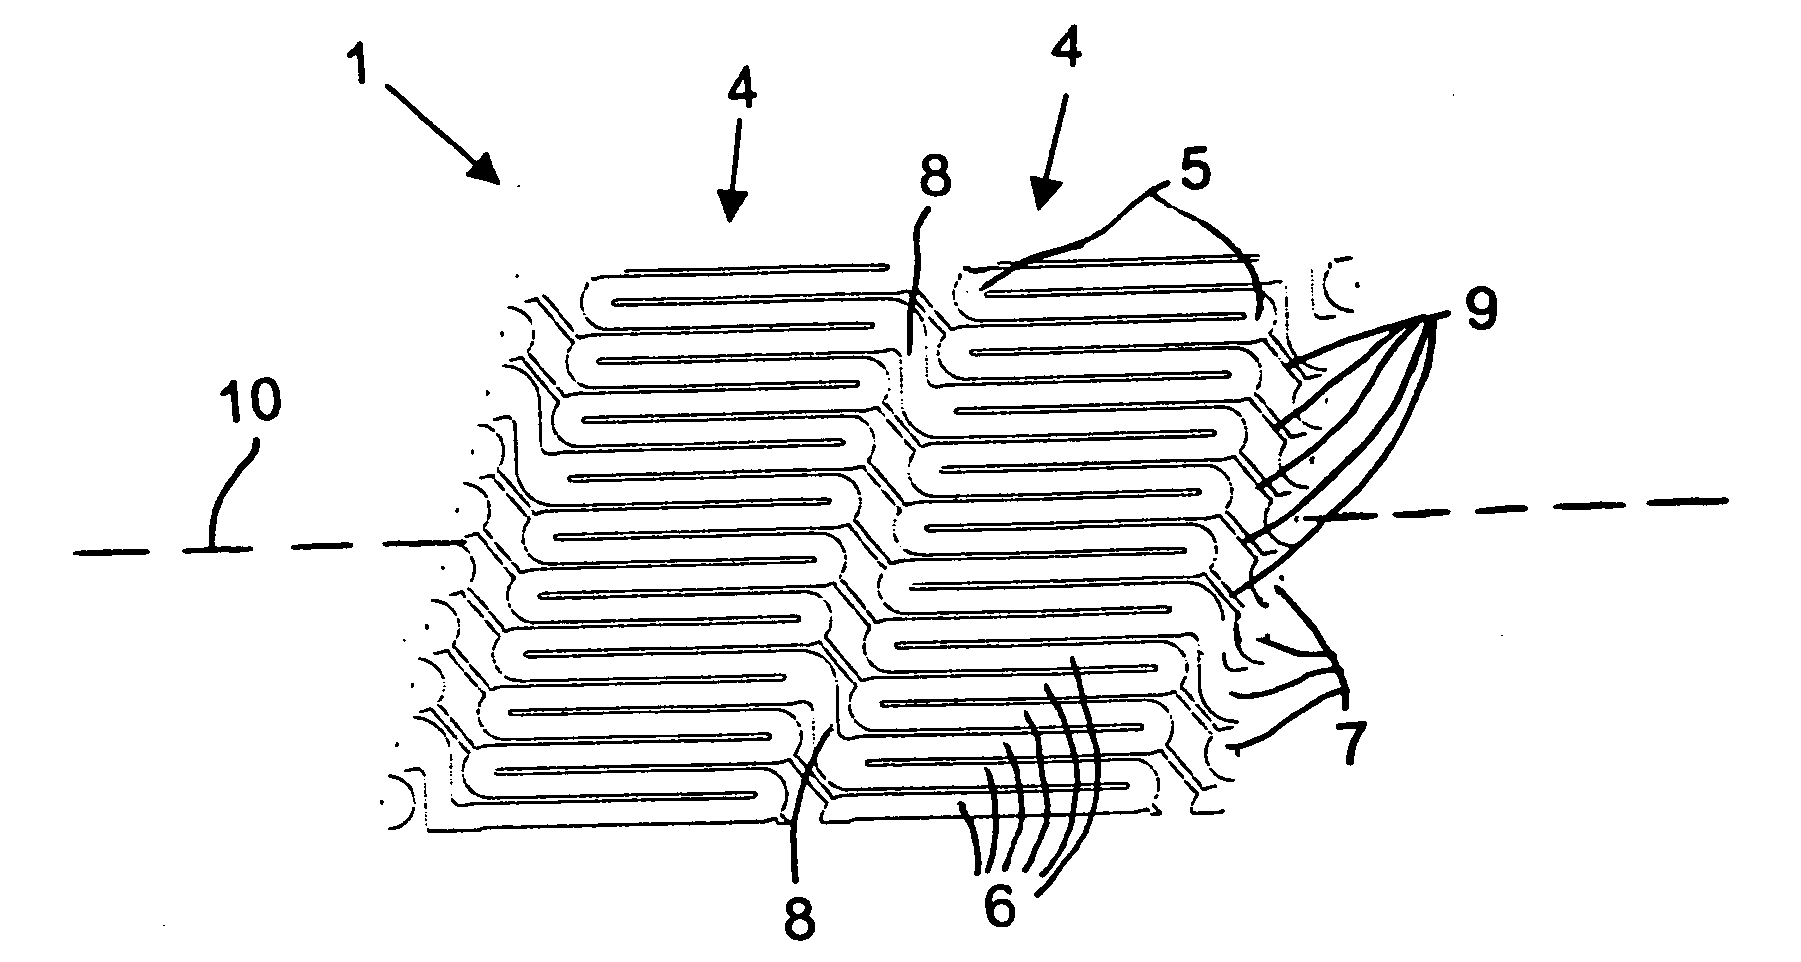 Stent and method for manufacturing the stent